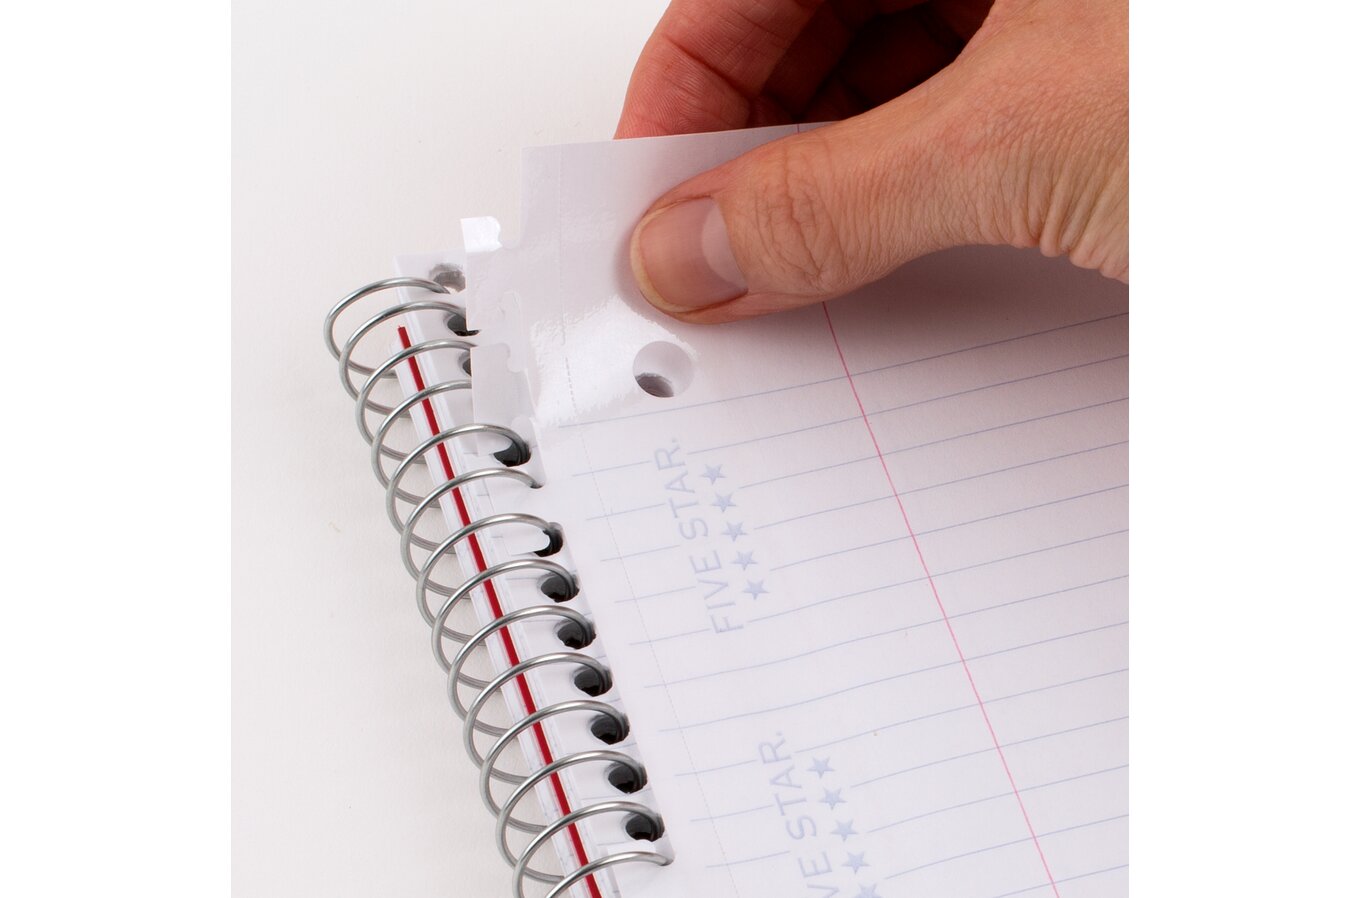 Five Star Reinforced Insertable Notebook Paper, Check out our NEW  Reinforced Insertable Notebook Paper! Create more notetaking space with  durable pages that easily snap in and out of your notebook